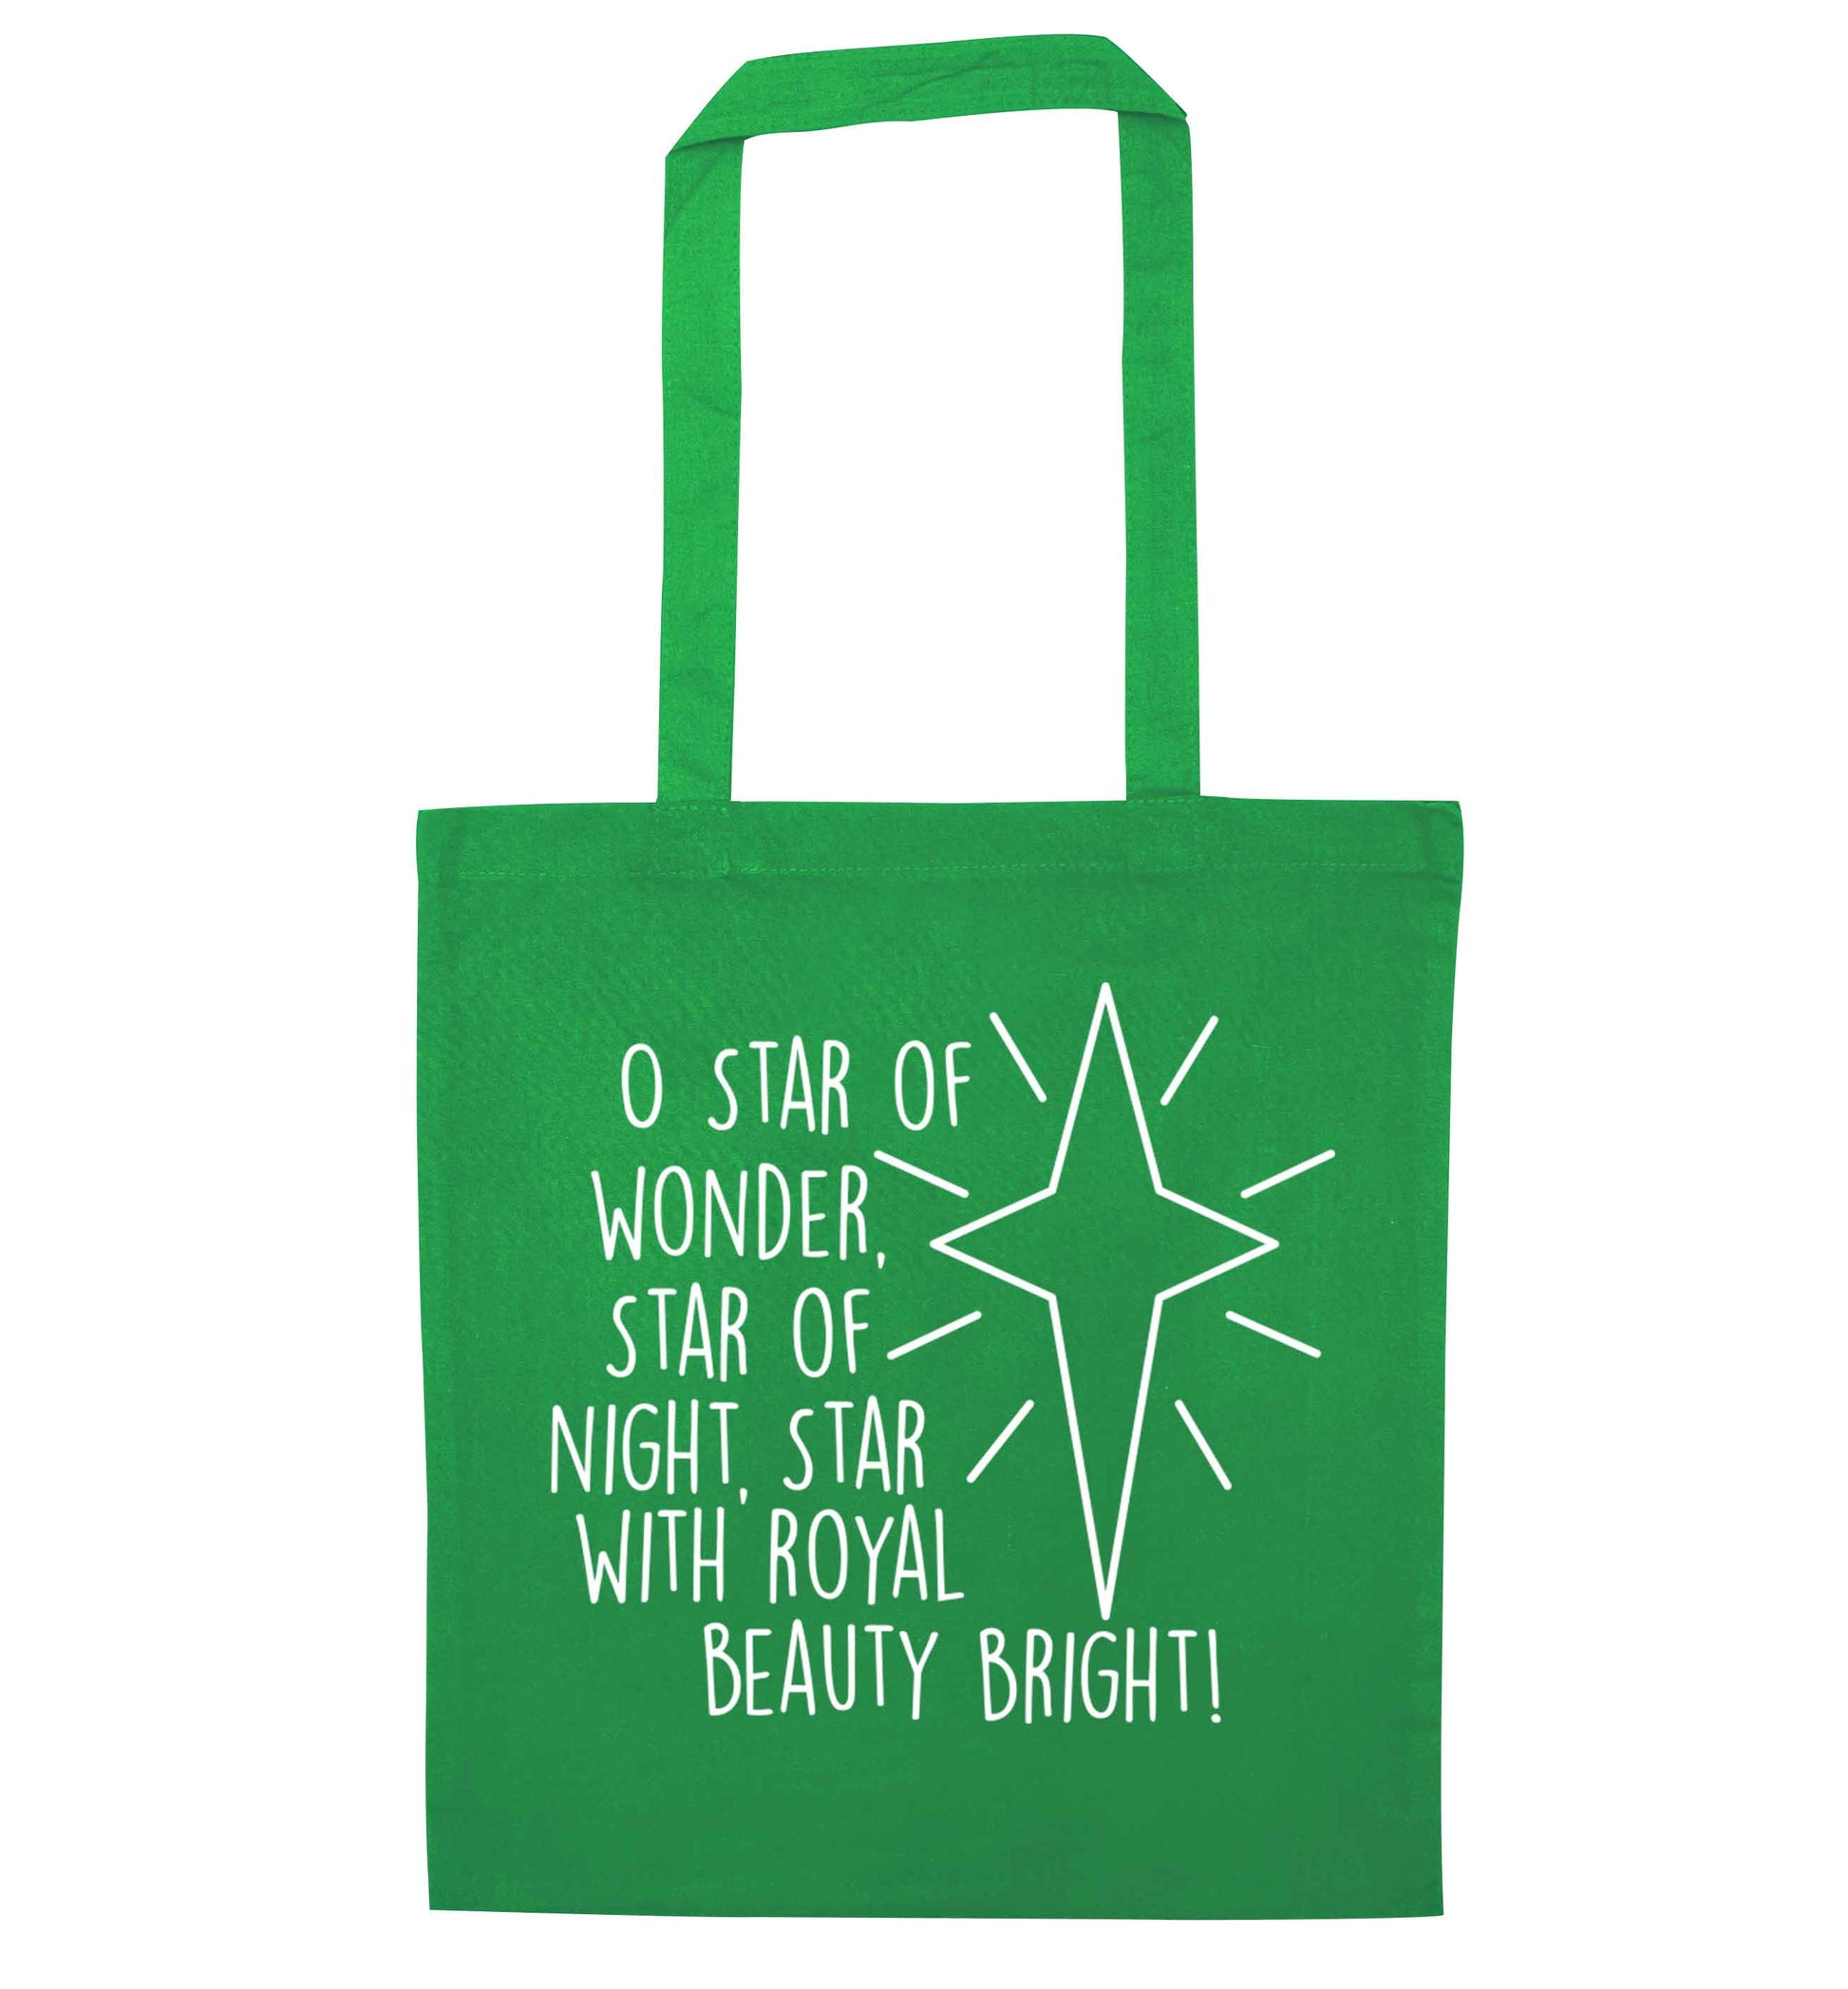 Oh star of wonder star of night, star with royal beauty bright green tote bag